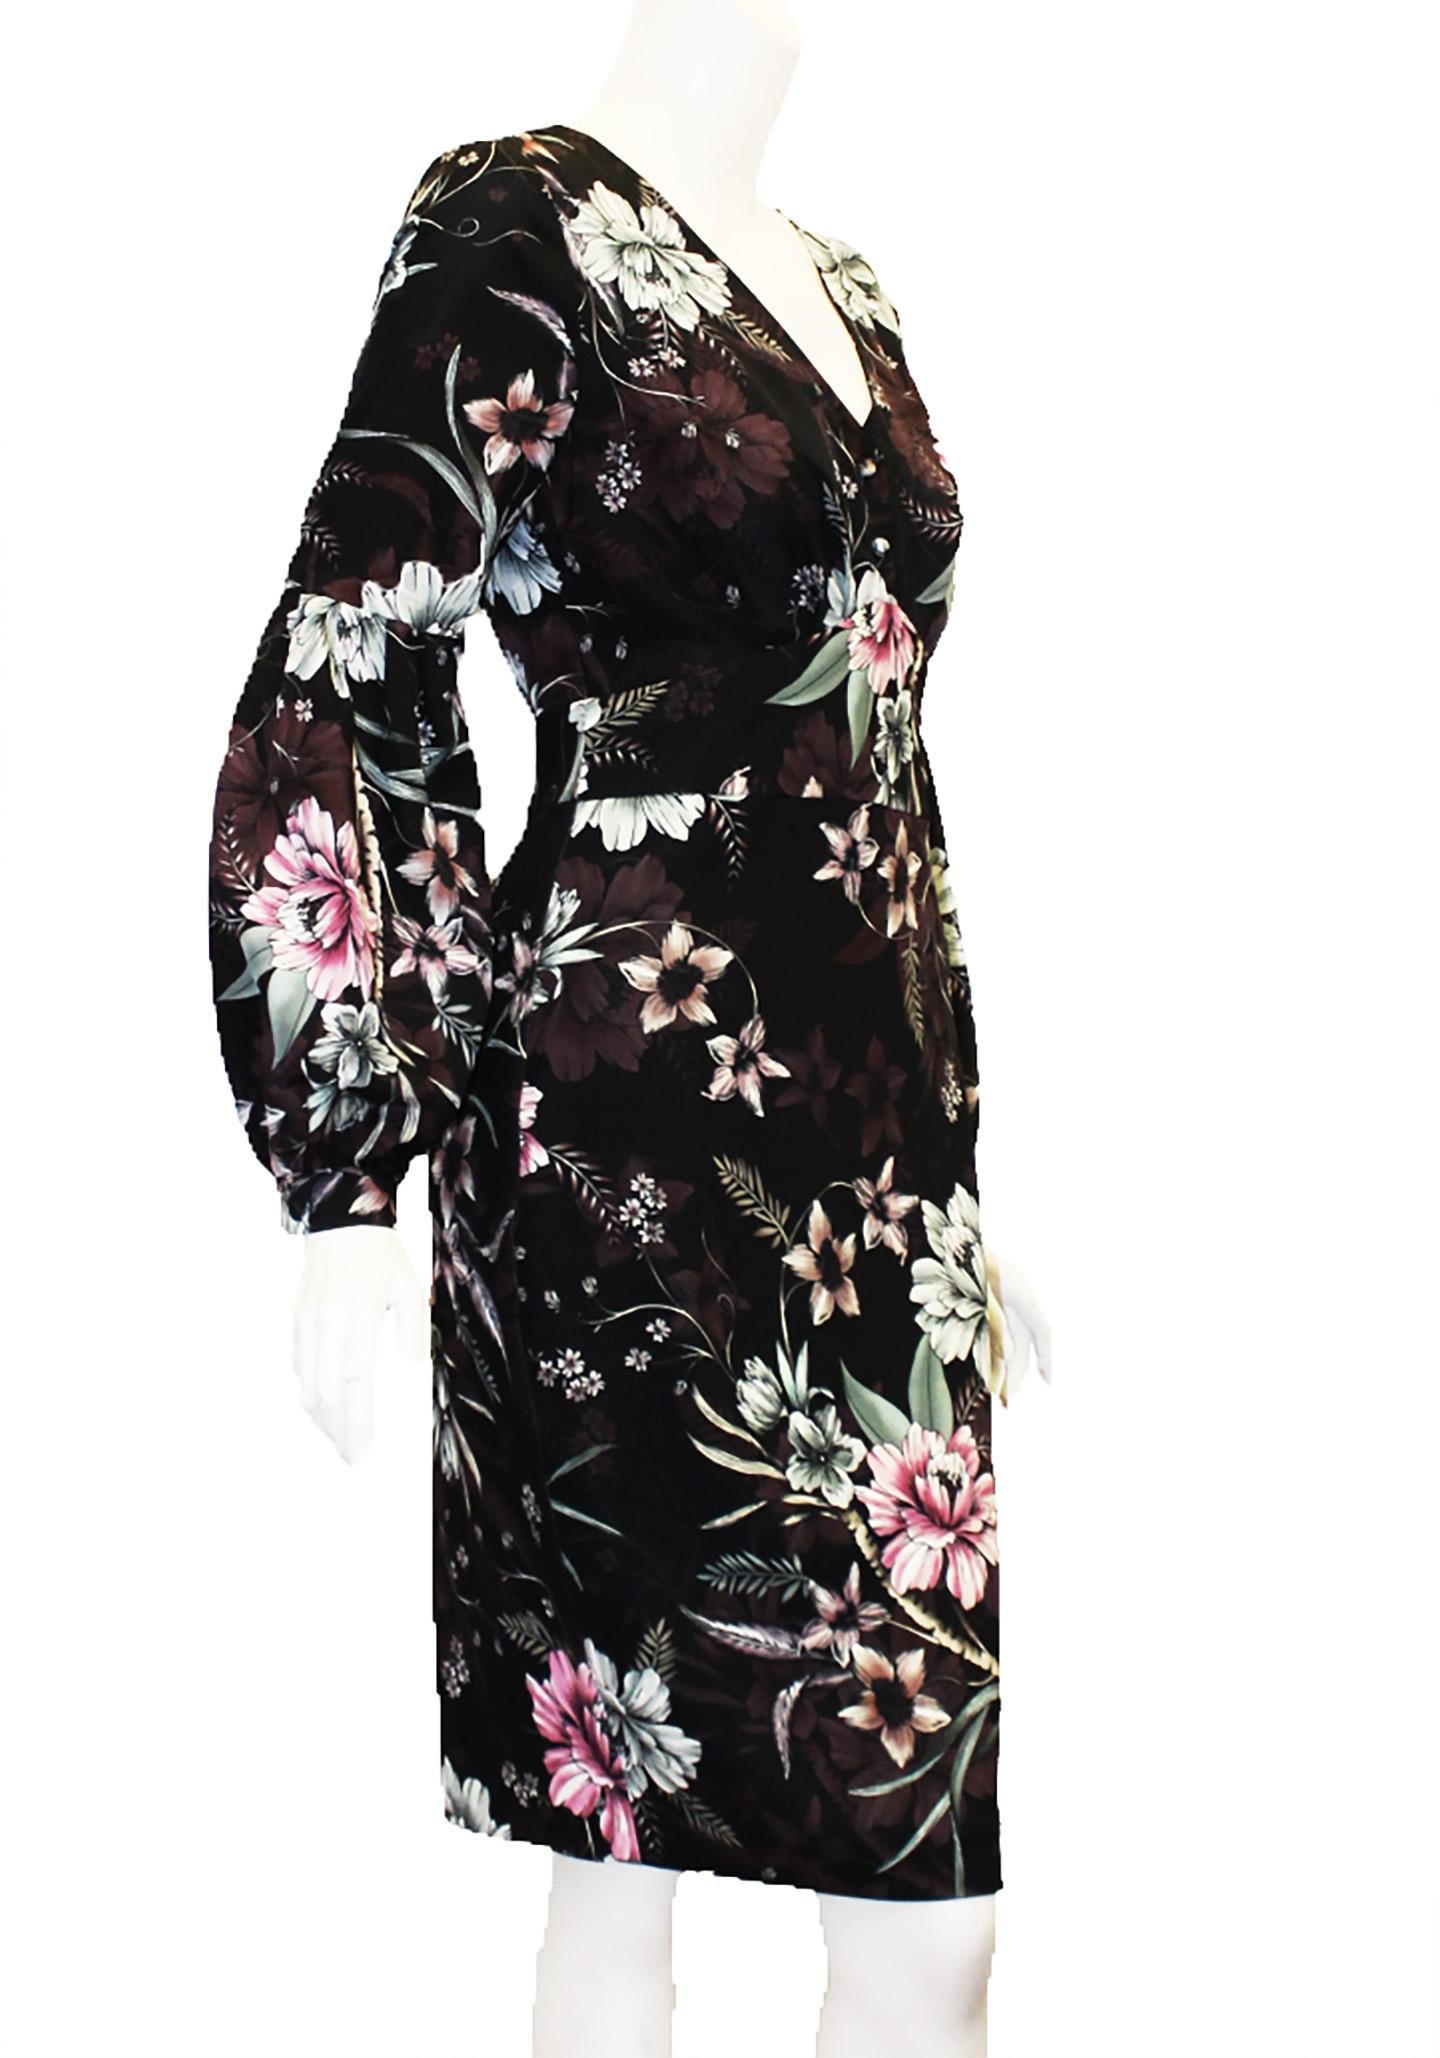 Badgley Mischka black base floral print dress with flowers in pink, burgundy, green and peach producing a blooming bouquet allover the dress.  Enhanced by a v neck and 2 covered buttons cinched at the waist this dress is casual but can easily be